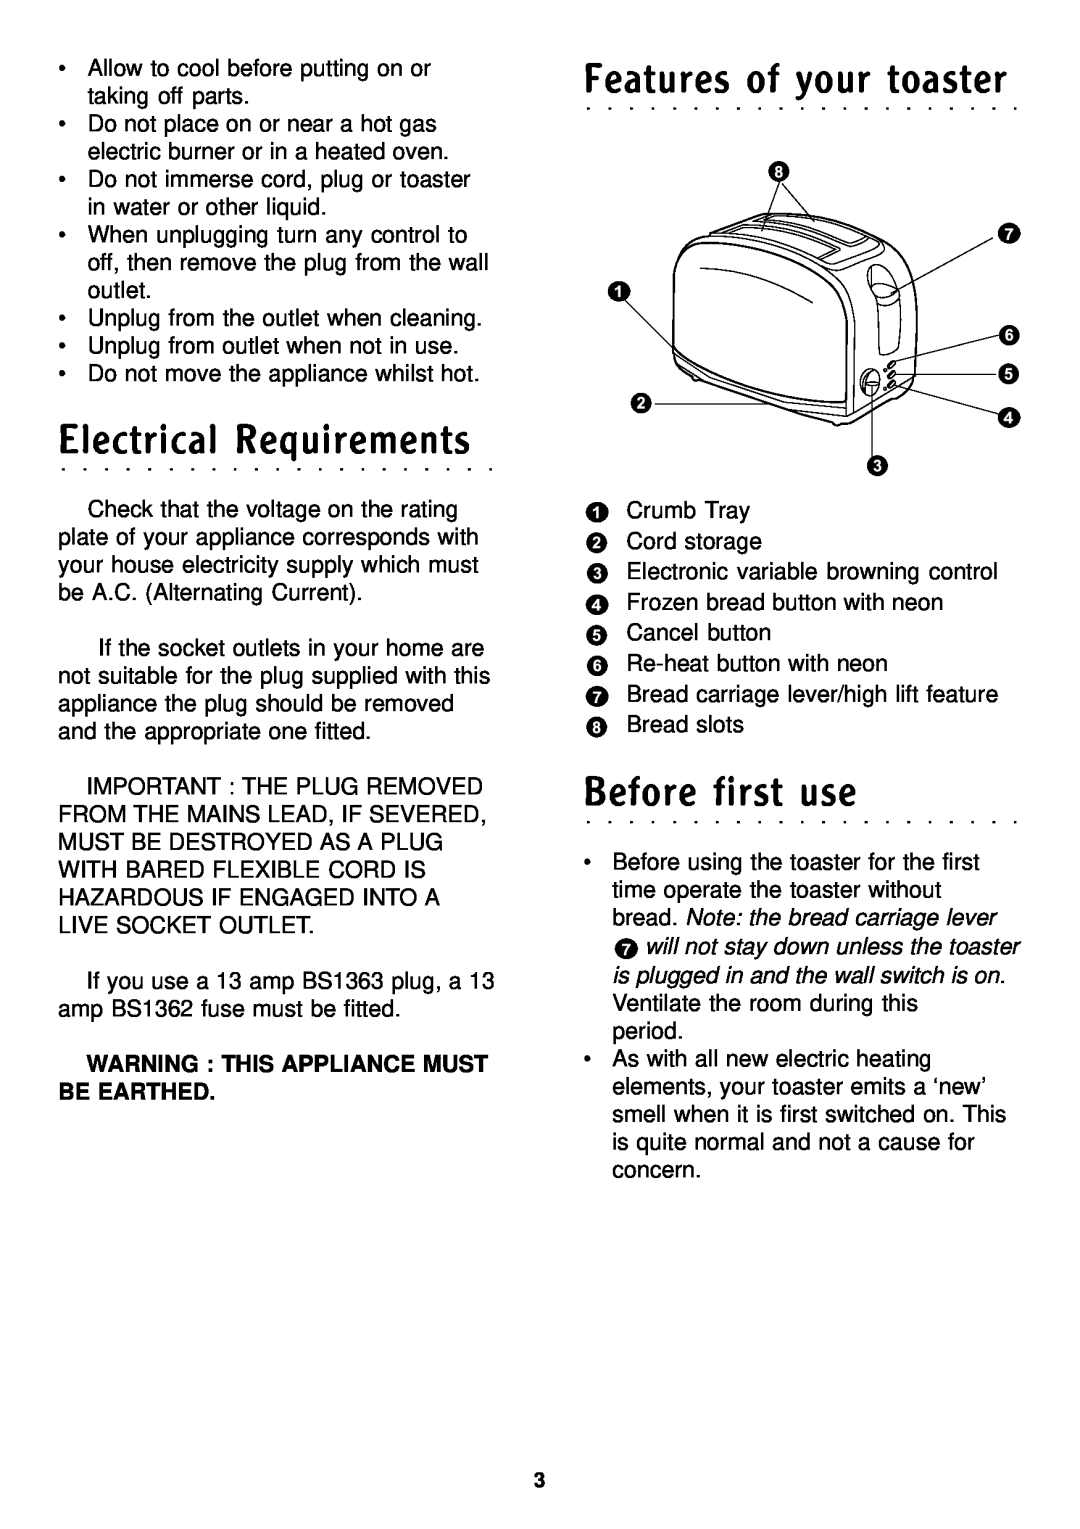 Morphy Richards Toaster manual Electrical Requirements, Features of your toaster, Before first use 